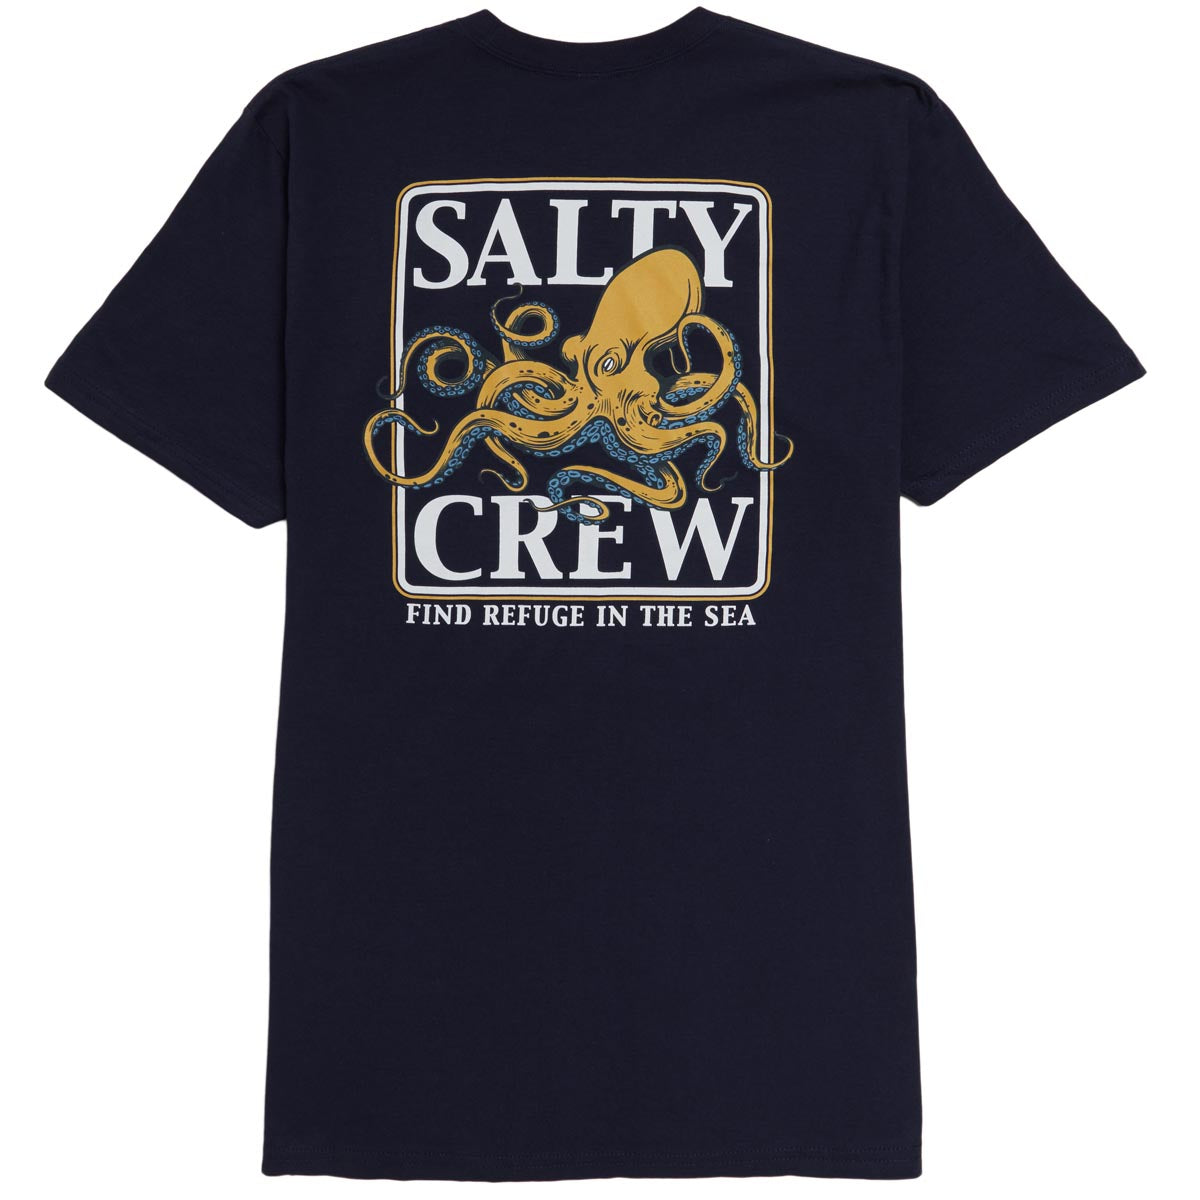 Salty Crew Ink Slinger Classic T-Shirt - Navy image 1